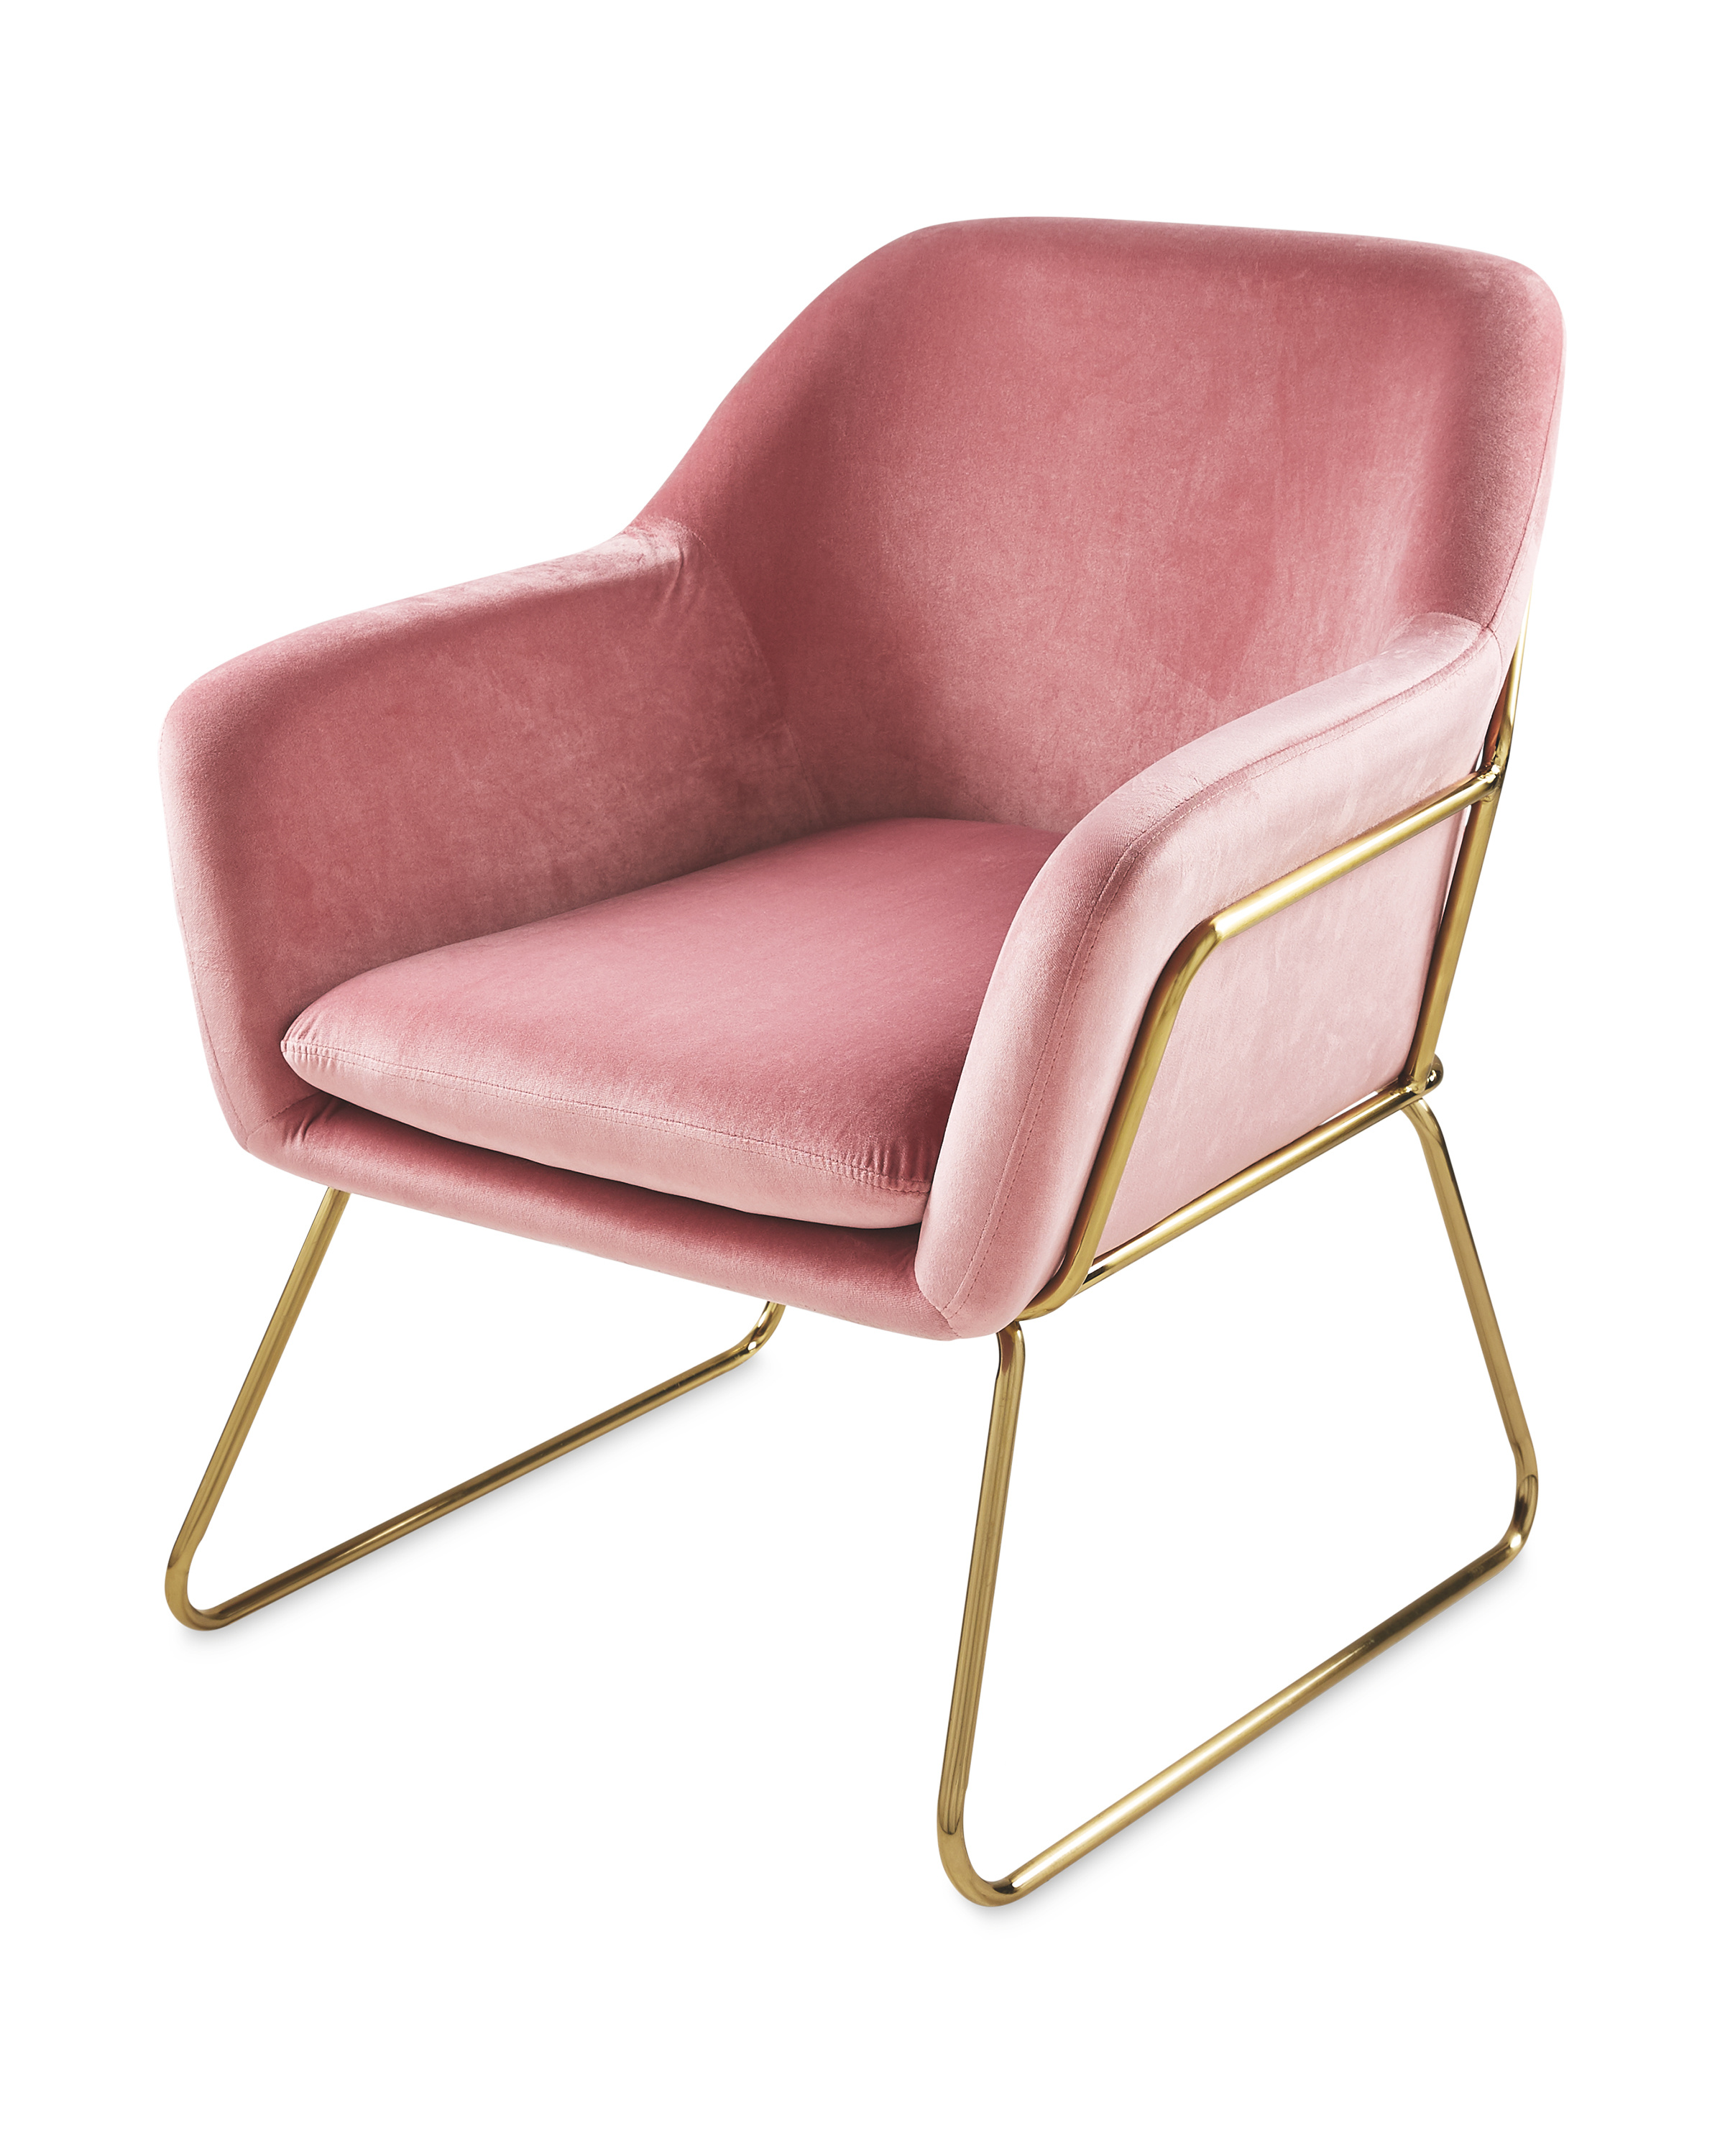 Metal Frame Pink Arm Chair Aldi Uk, Pink Arm Chairs